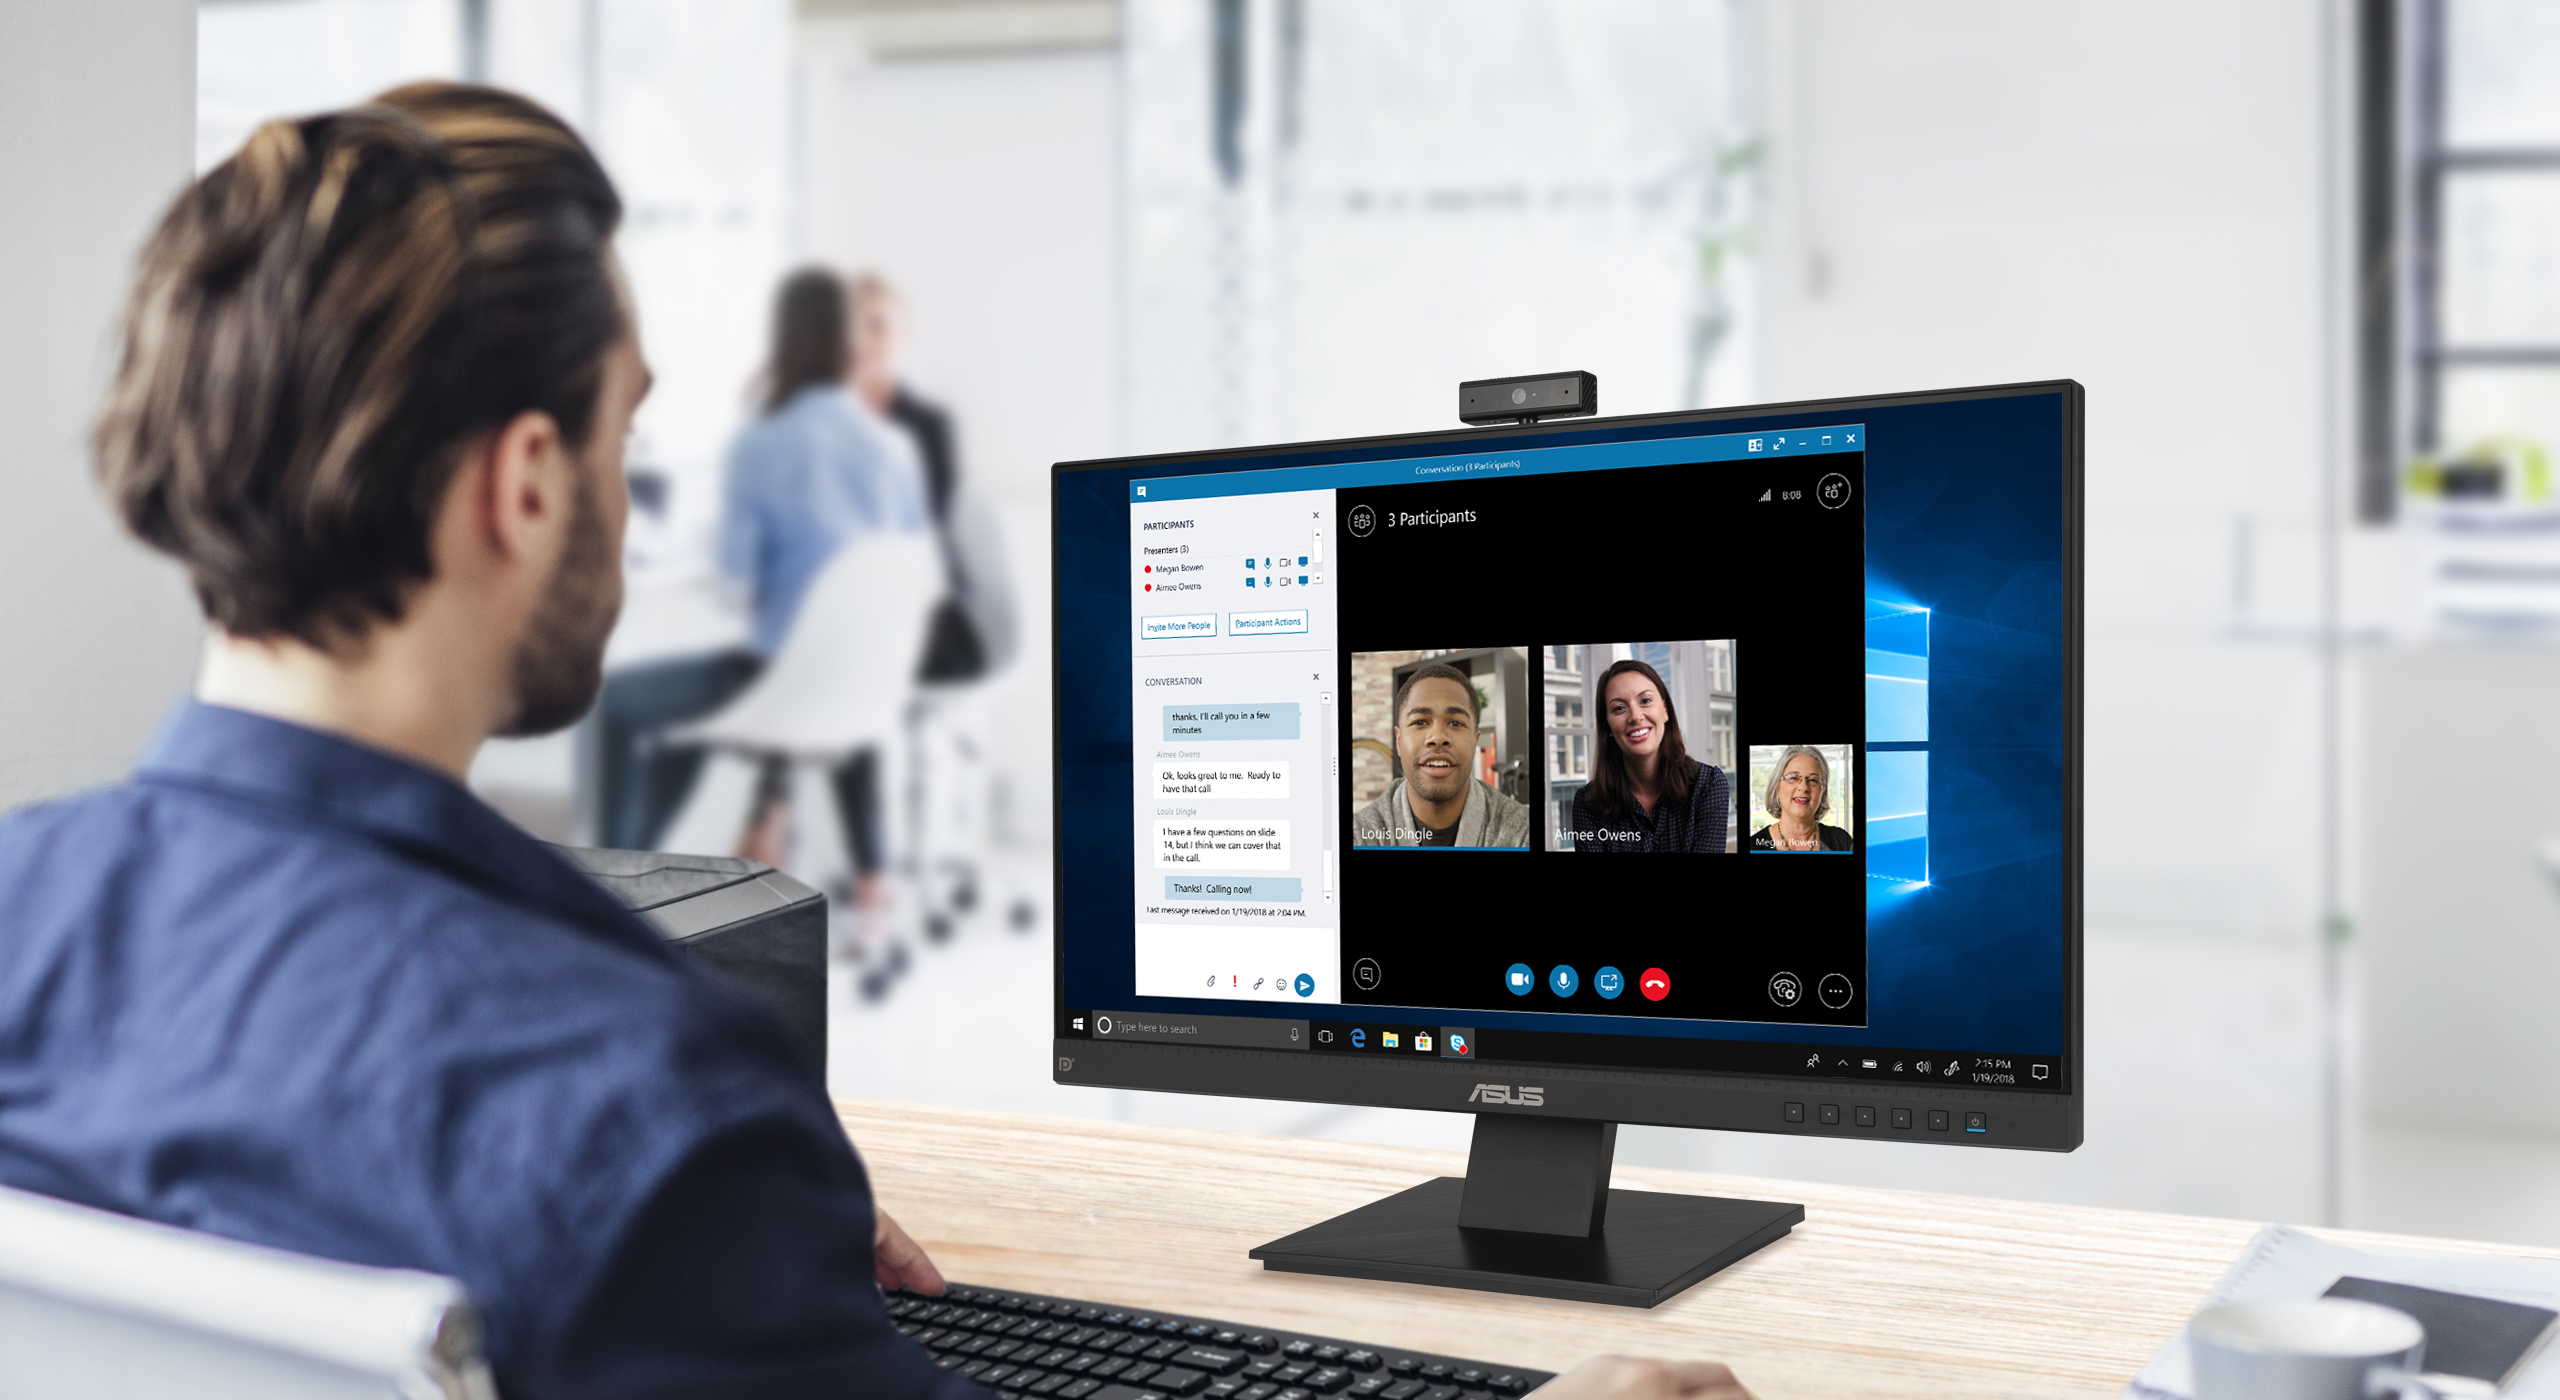 BE24EQK is a 23.8-inch Full HD monitor that features an integrated Full HD (2MP) webcam, microphone array and stereo speakers for video conferencing and live-streaming.